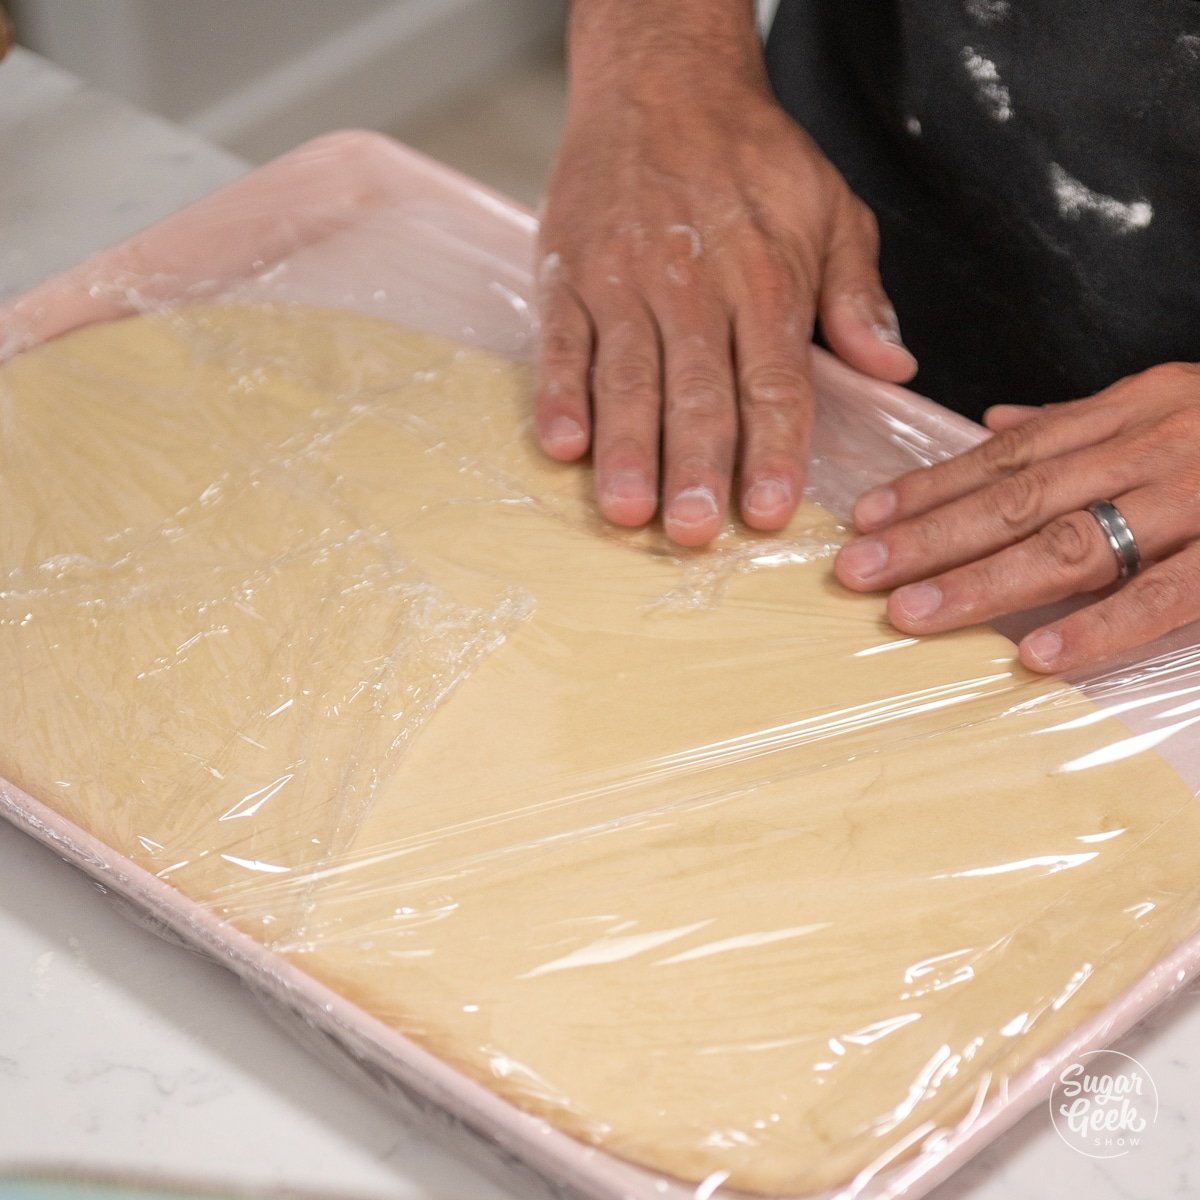 hands pressing plastic wrap over croissant dough on a sheet pan